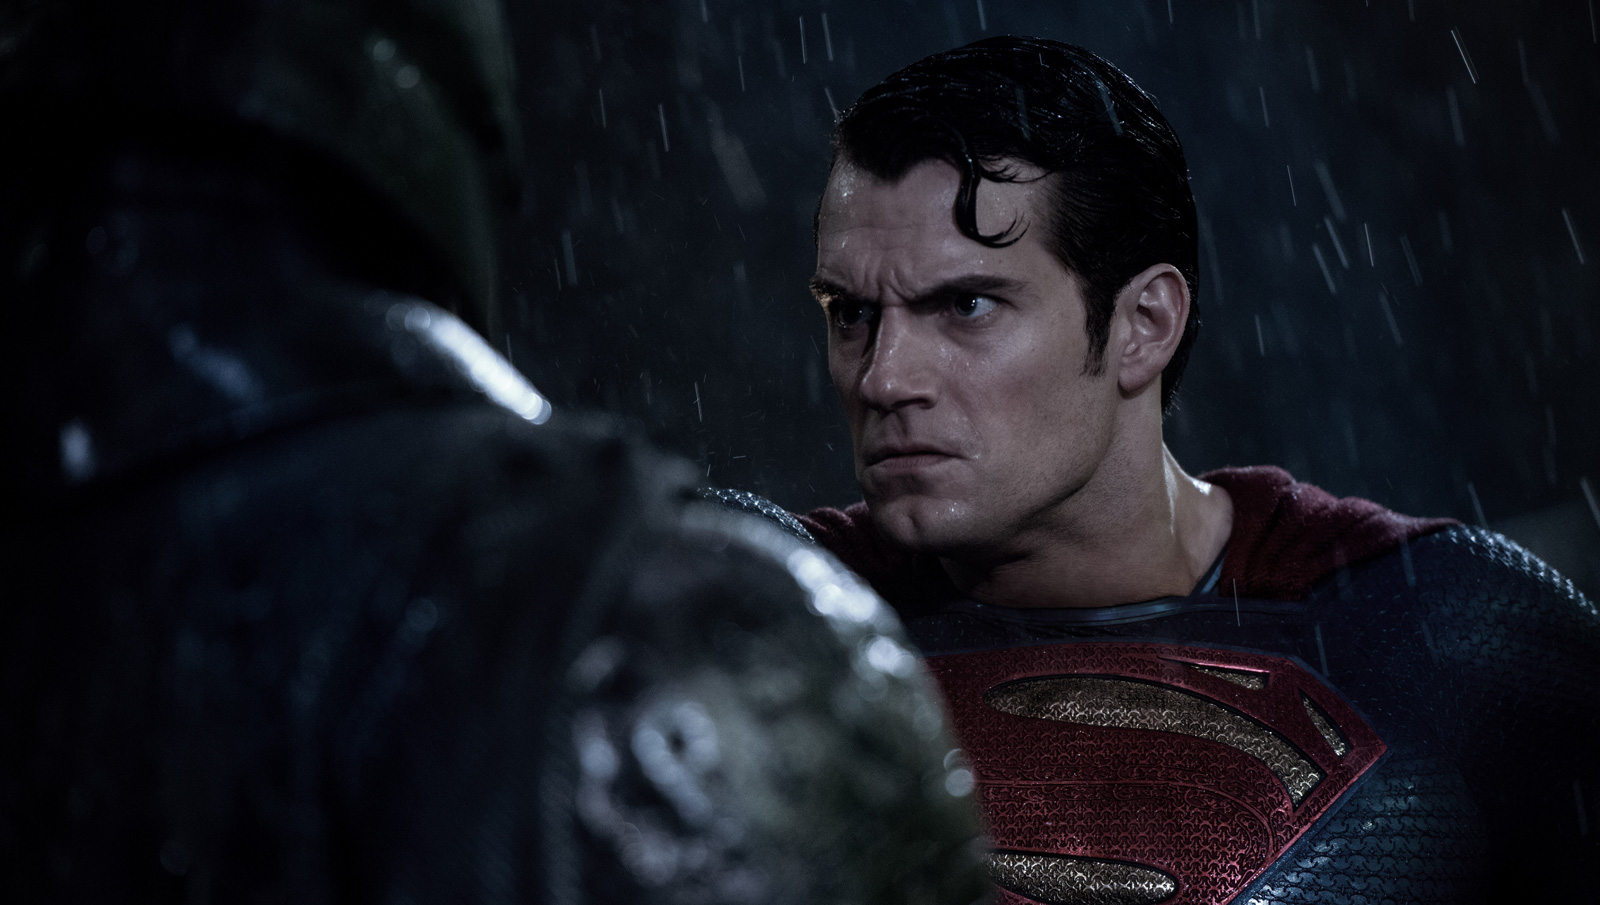 Superman returns: New Justice League image teases Henry Cavill's